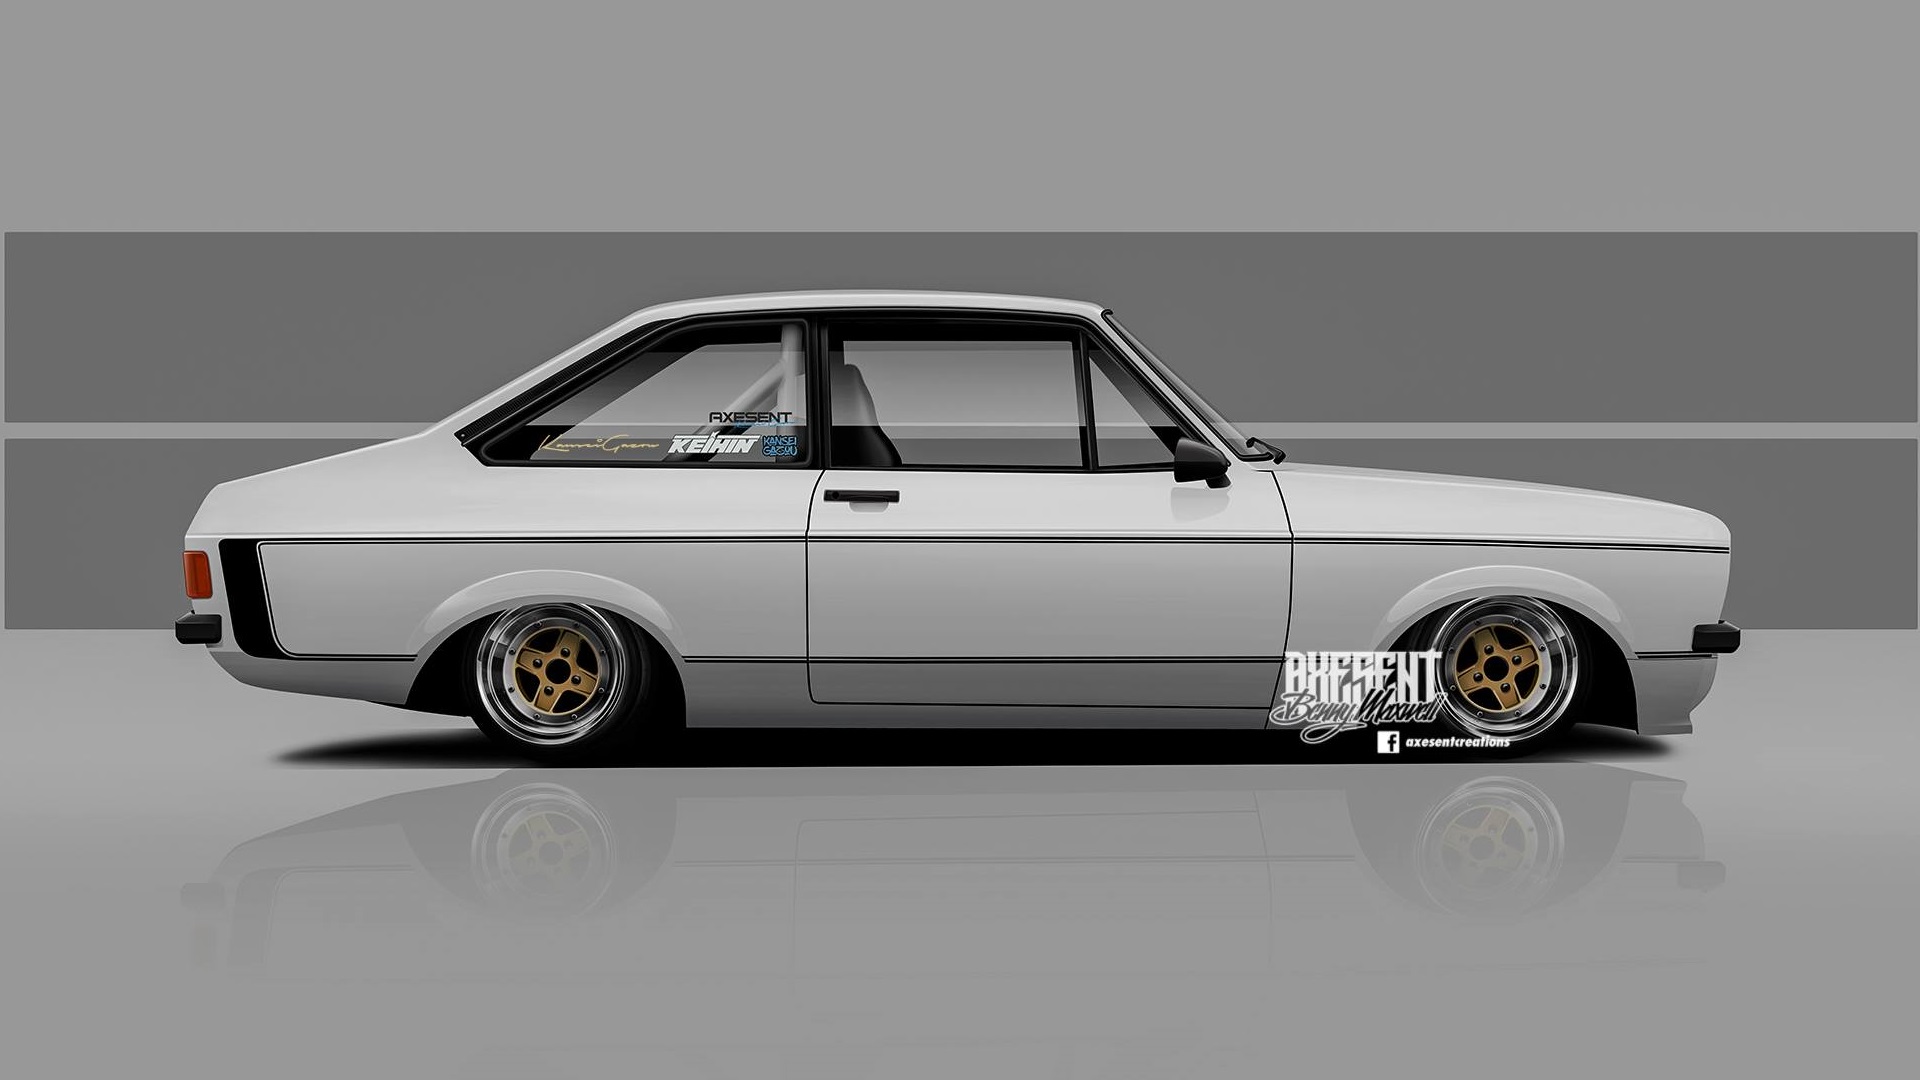 Axesent Creations Ford Escort Mkii Render Ford British Cars Side View White Cars 1920x1080